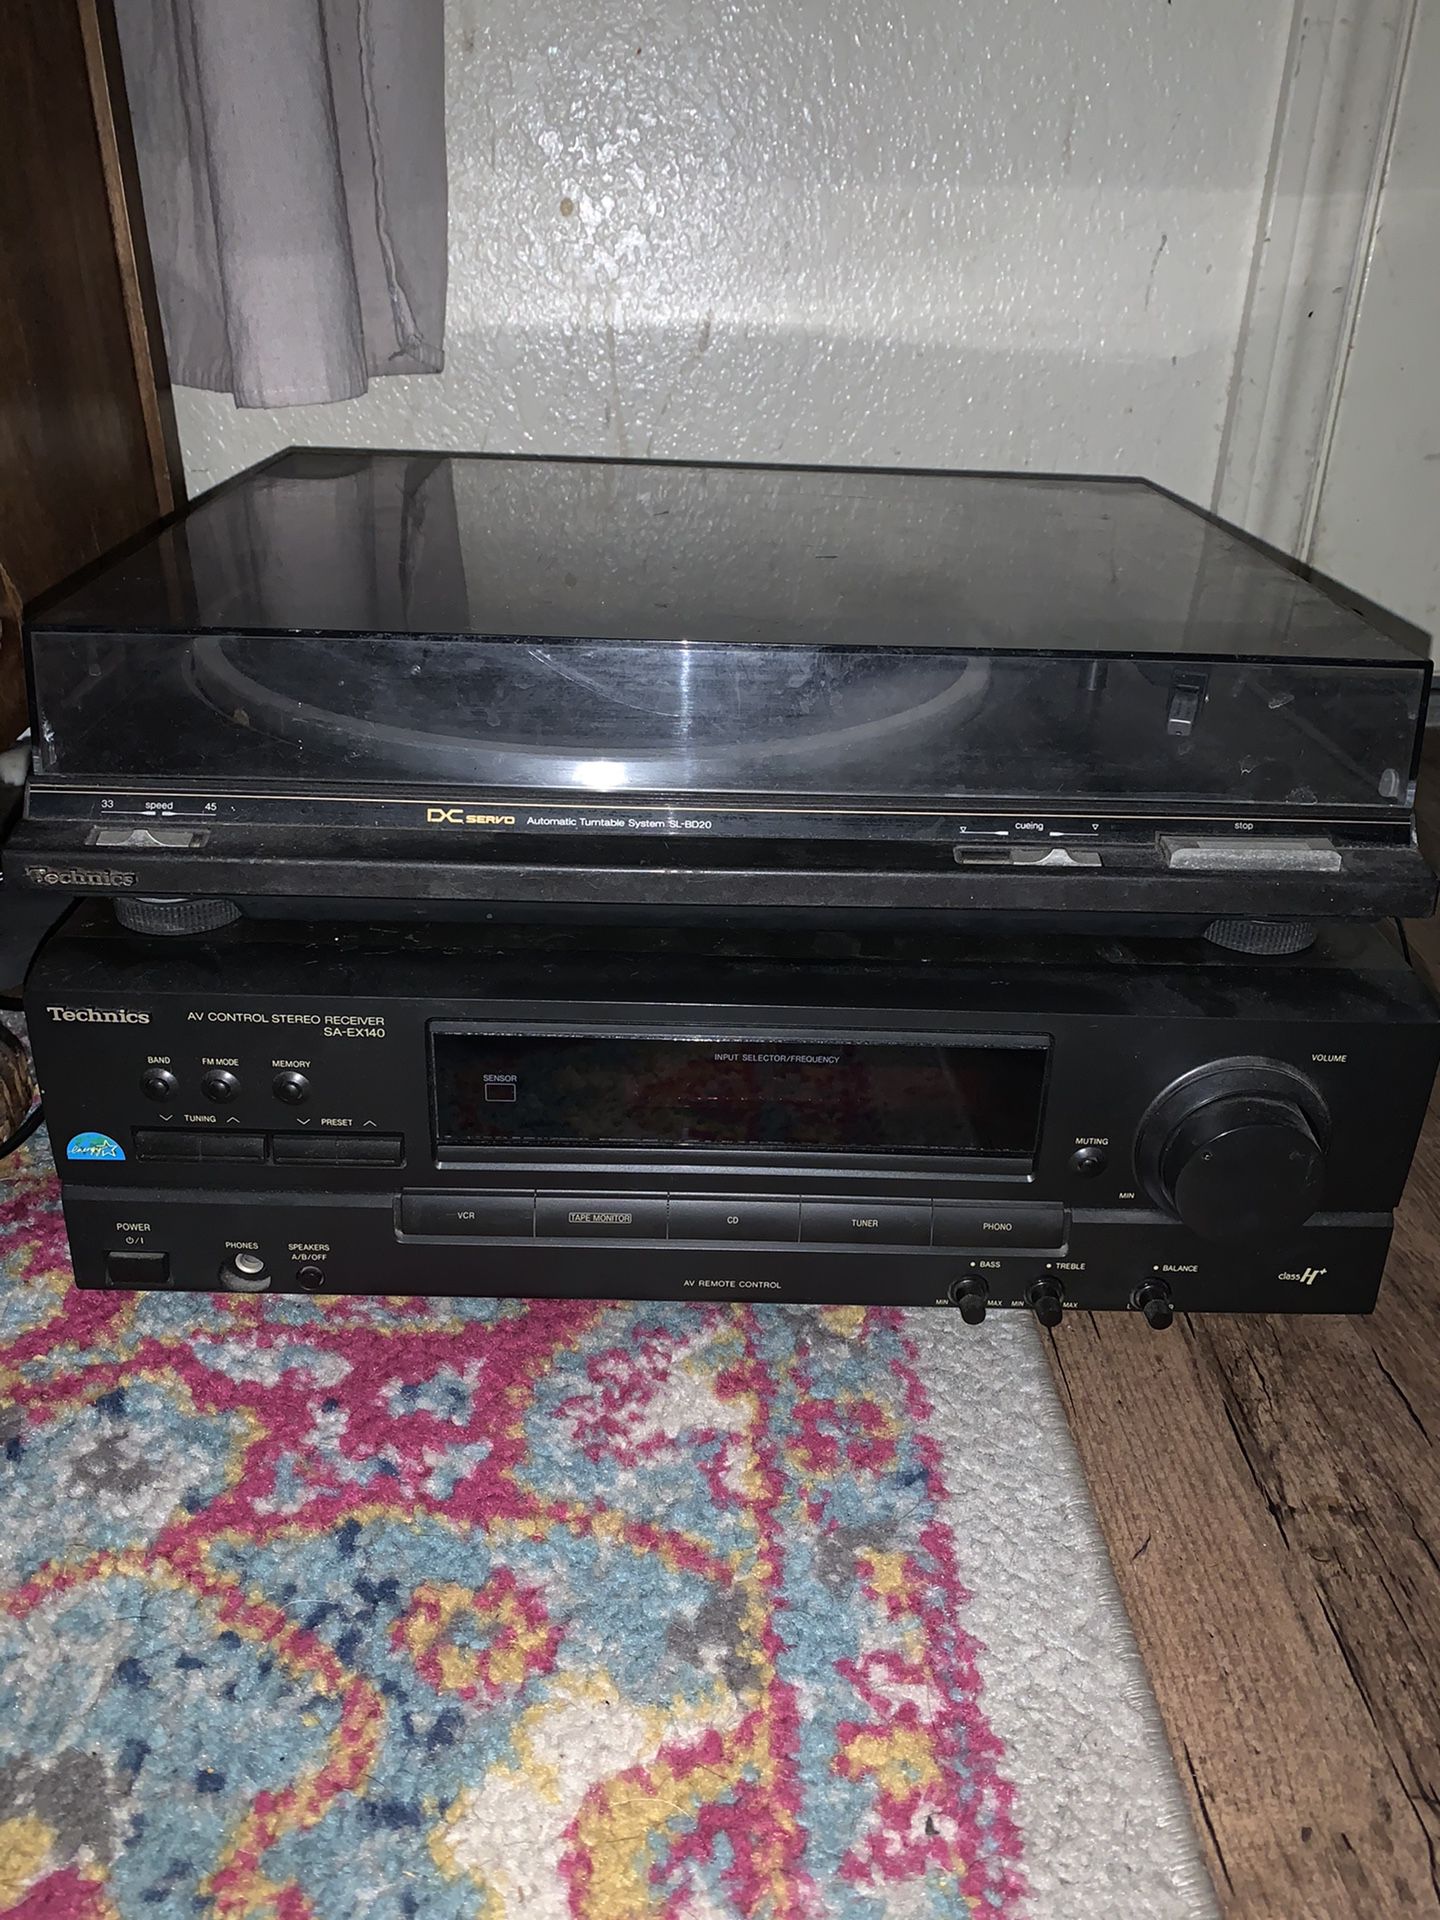 Technics Turntable & Stereo Receiver